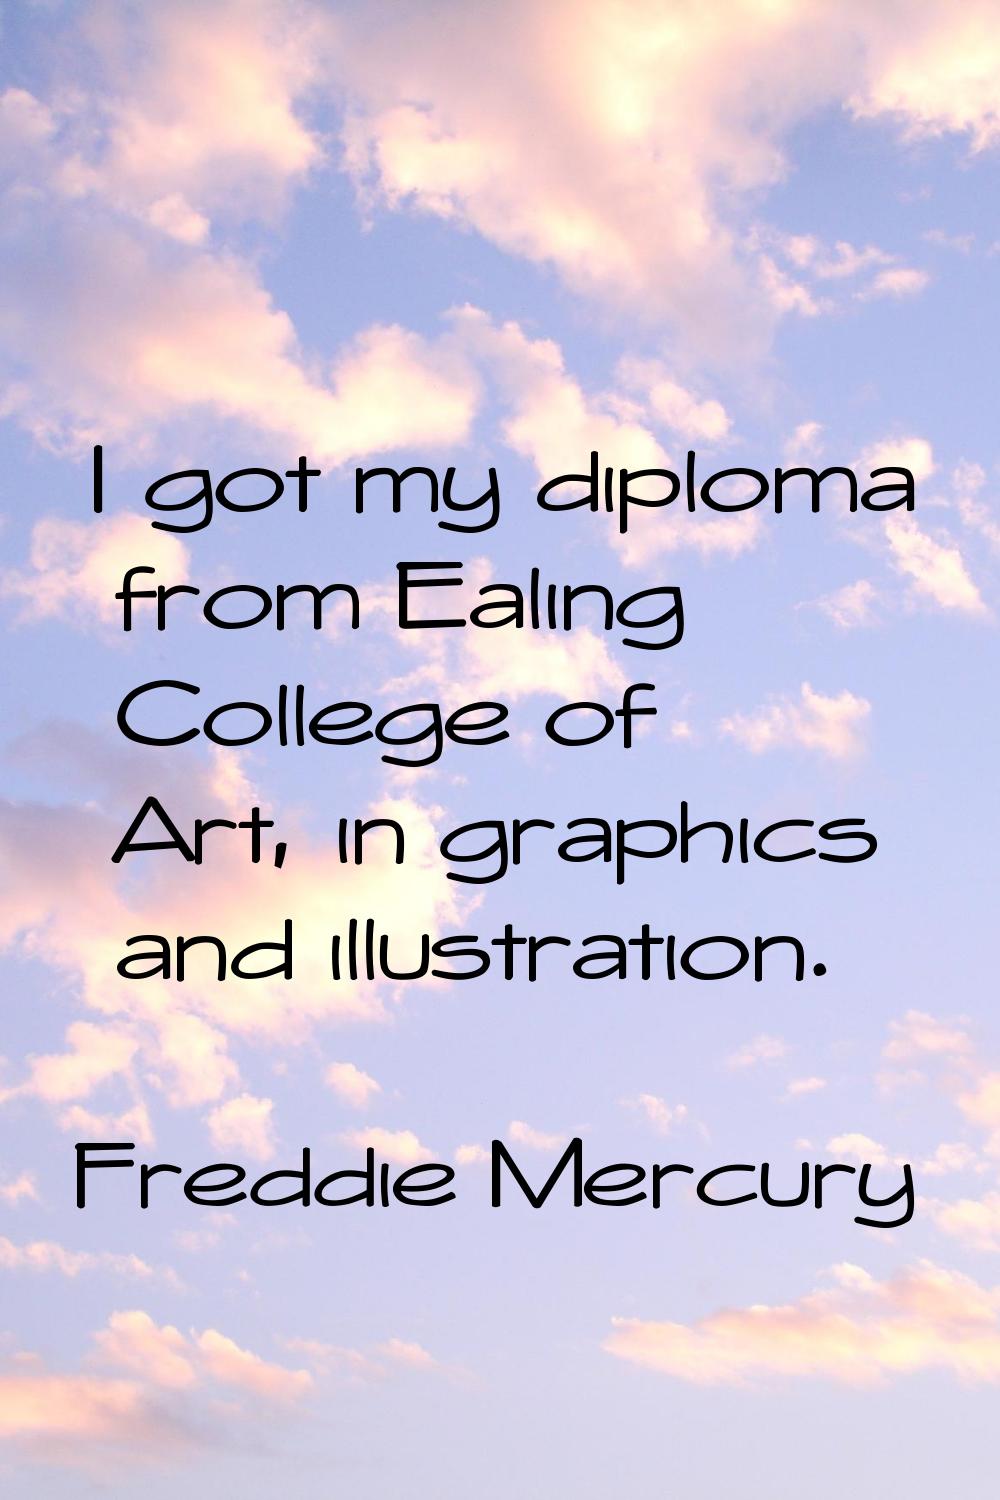 I got my diploma from Ealing College of Art, in graphics and illustration.